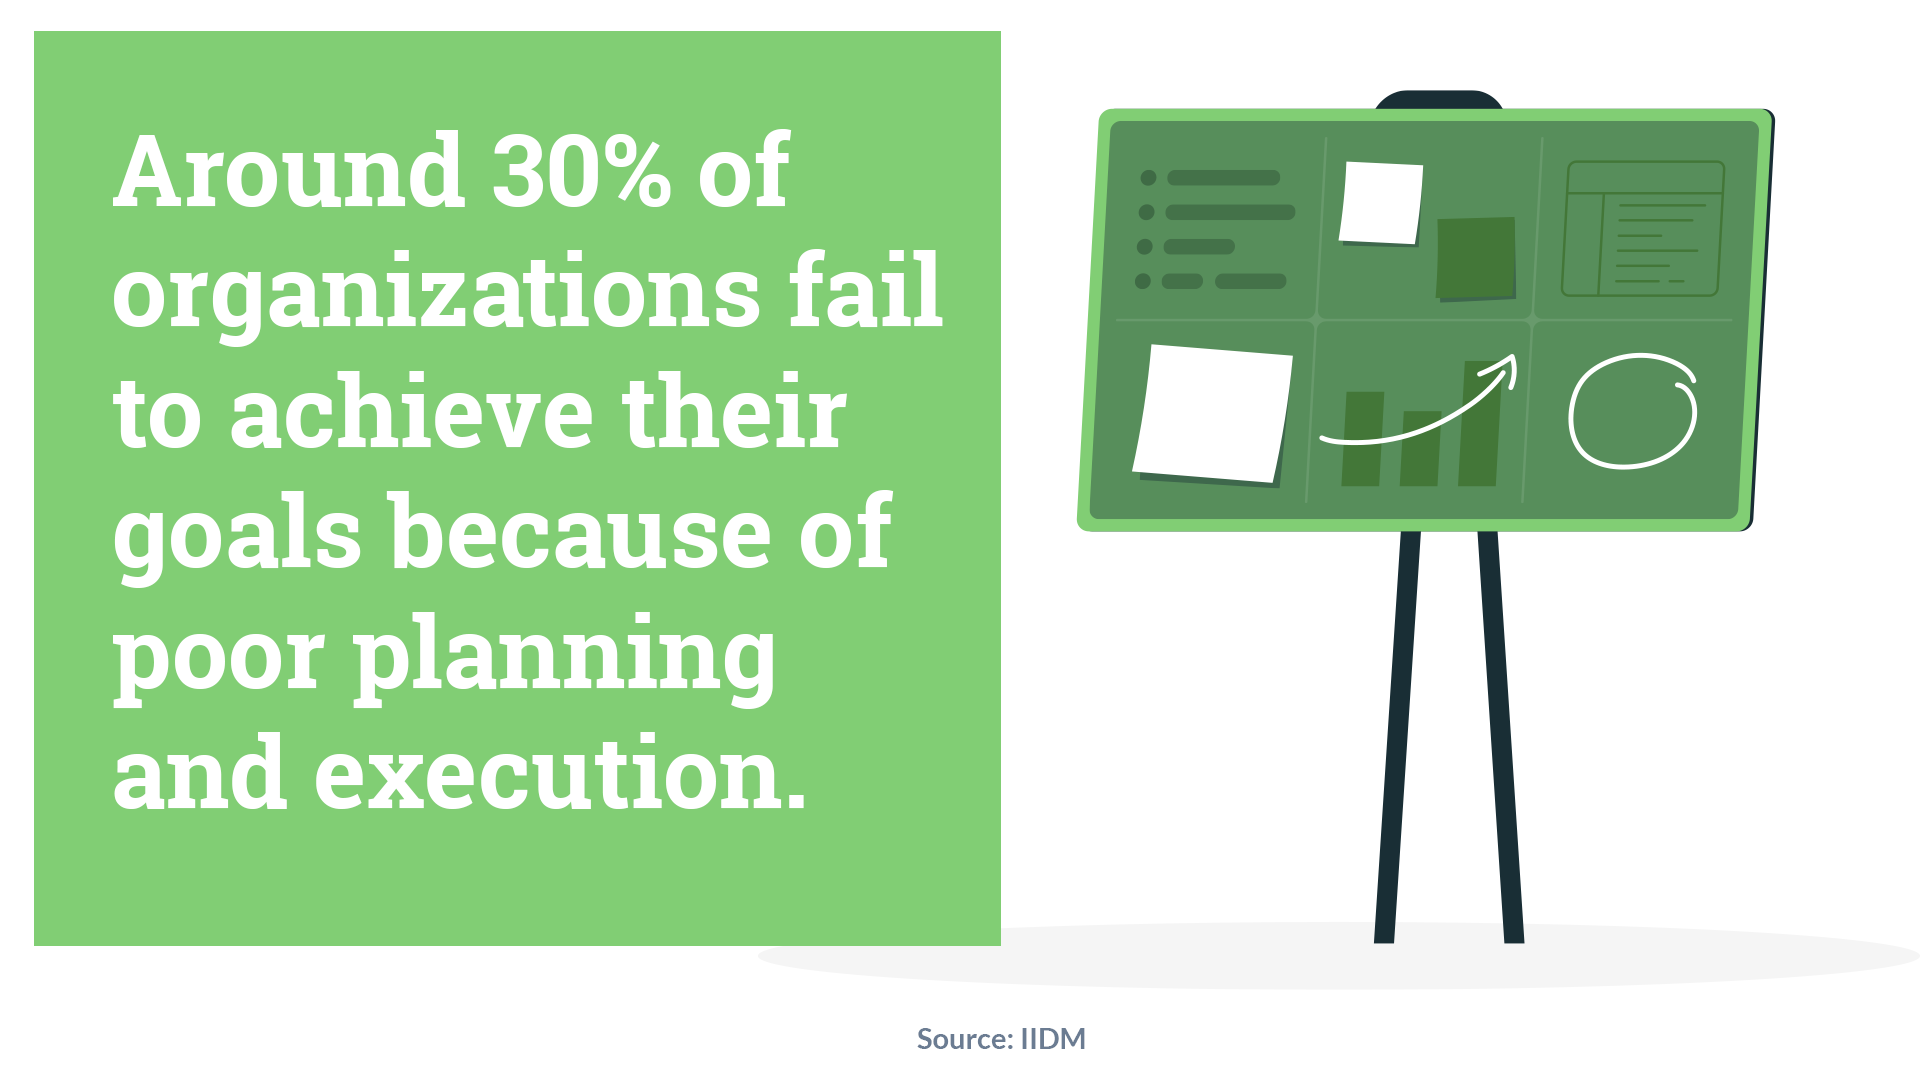 Around 30% of organisations fail to achieve their goals because of poor planning and execution.